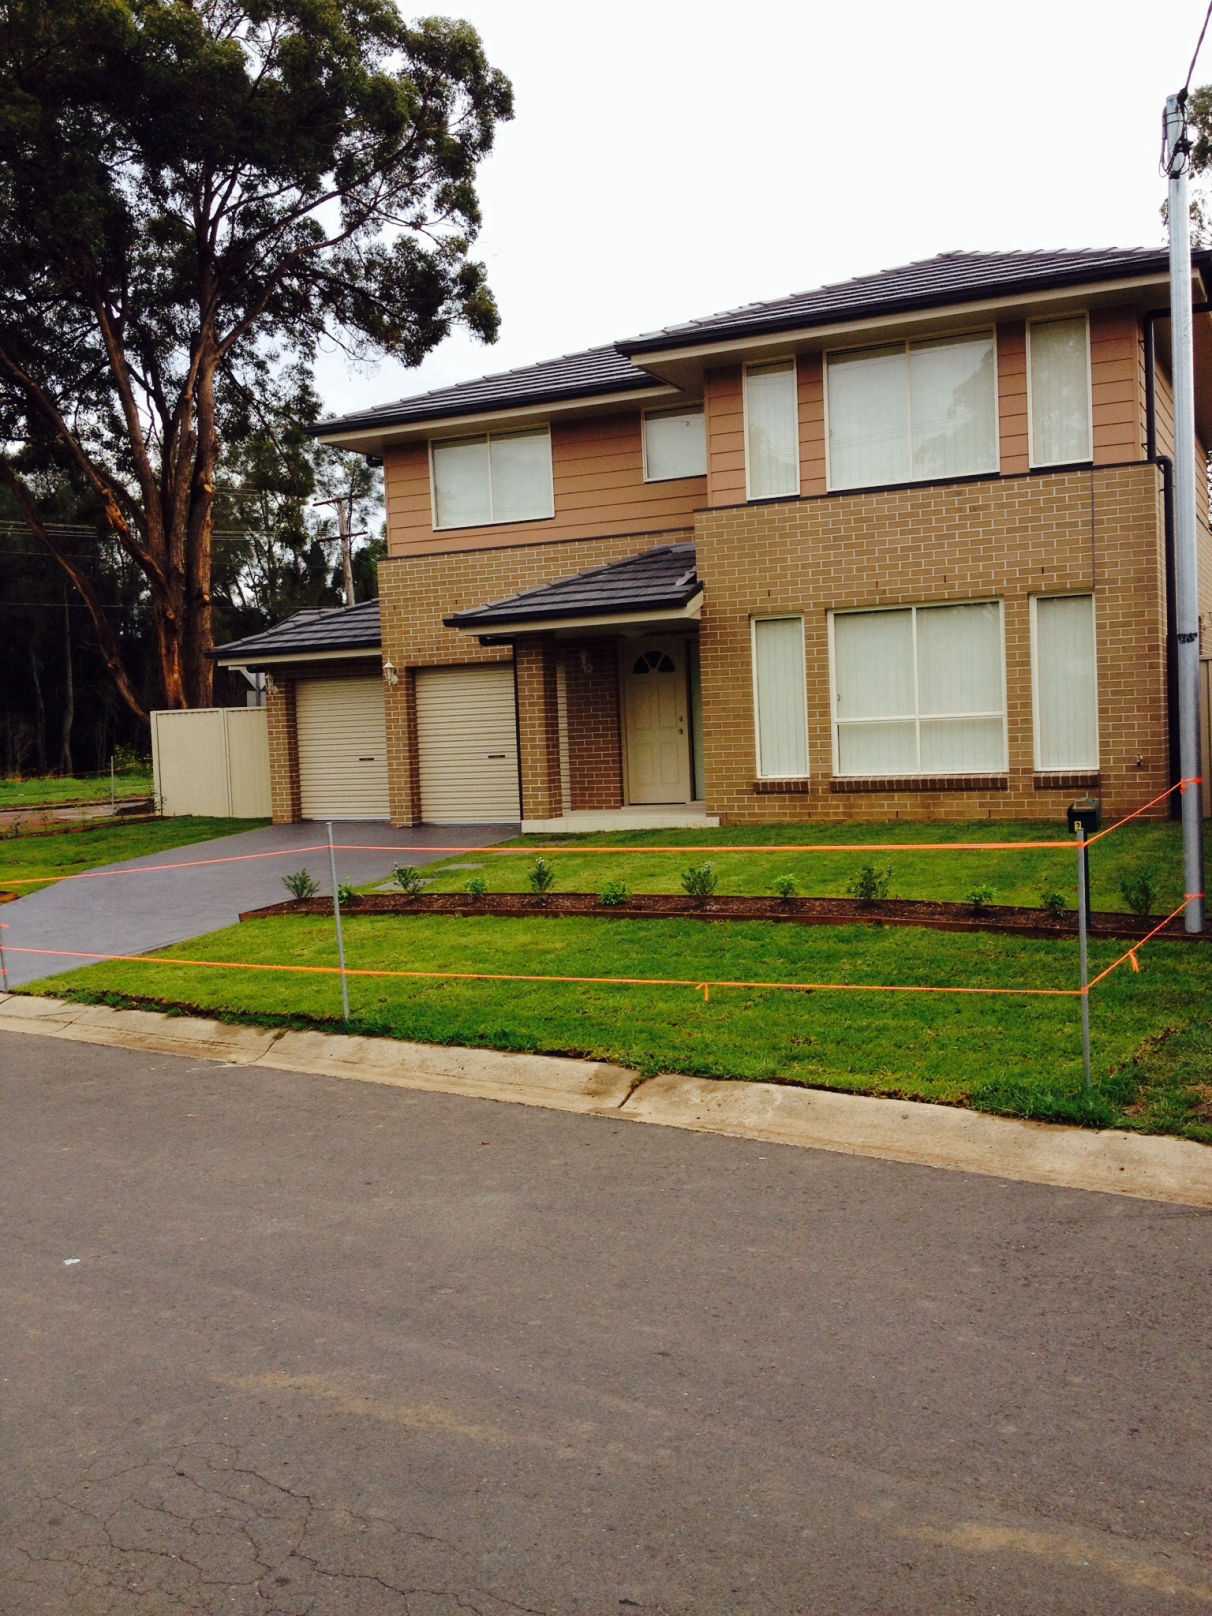 Hus i Glenfield, New South Wales 11053438